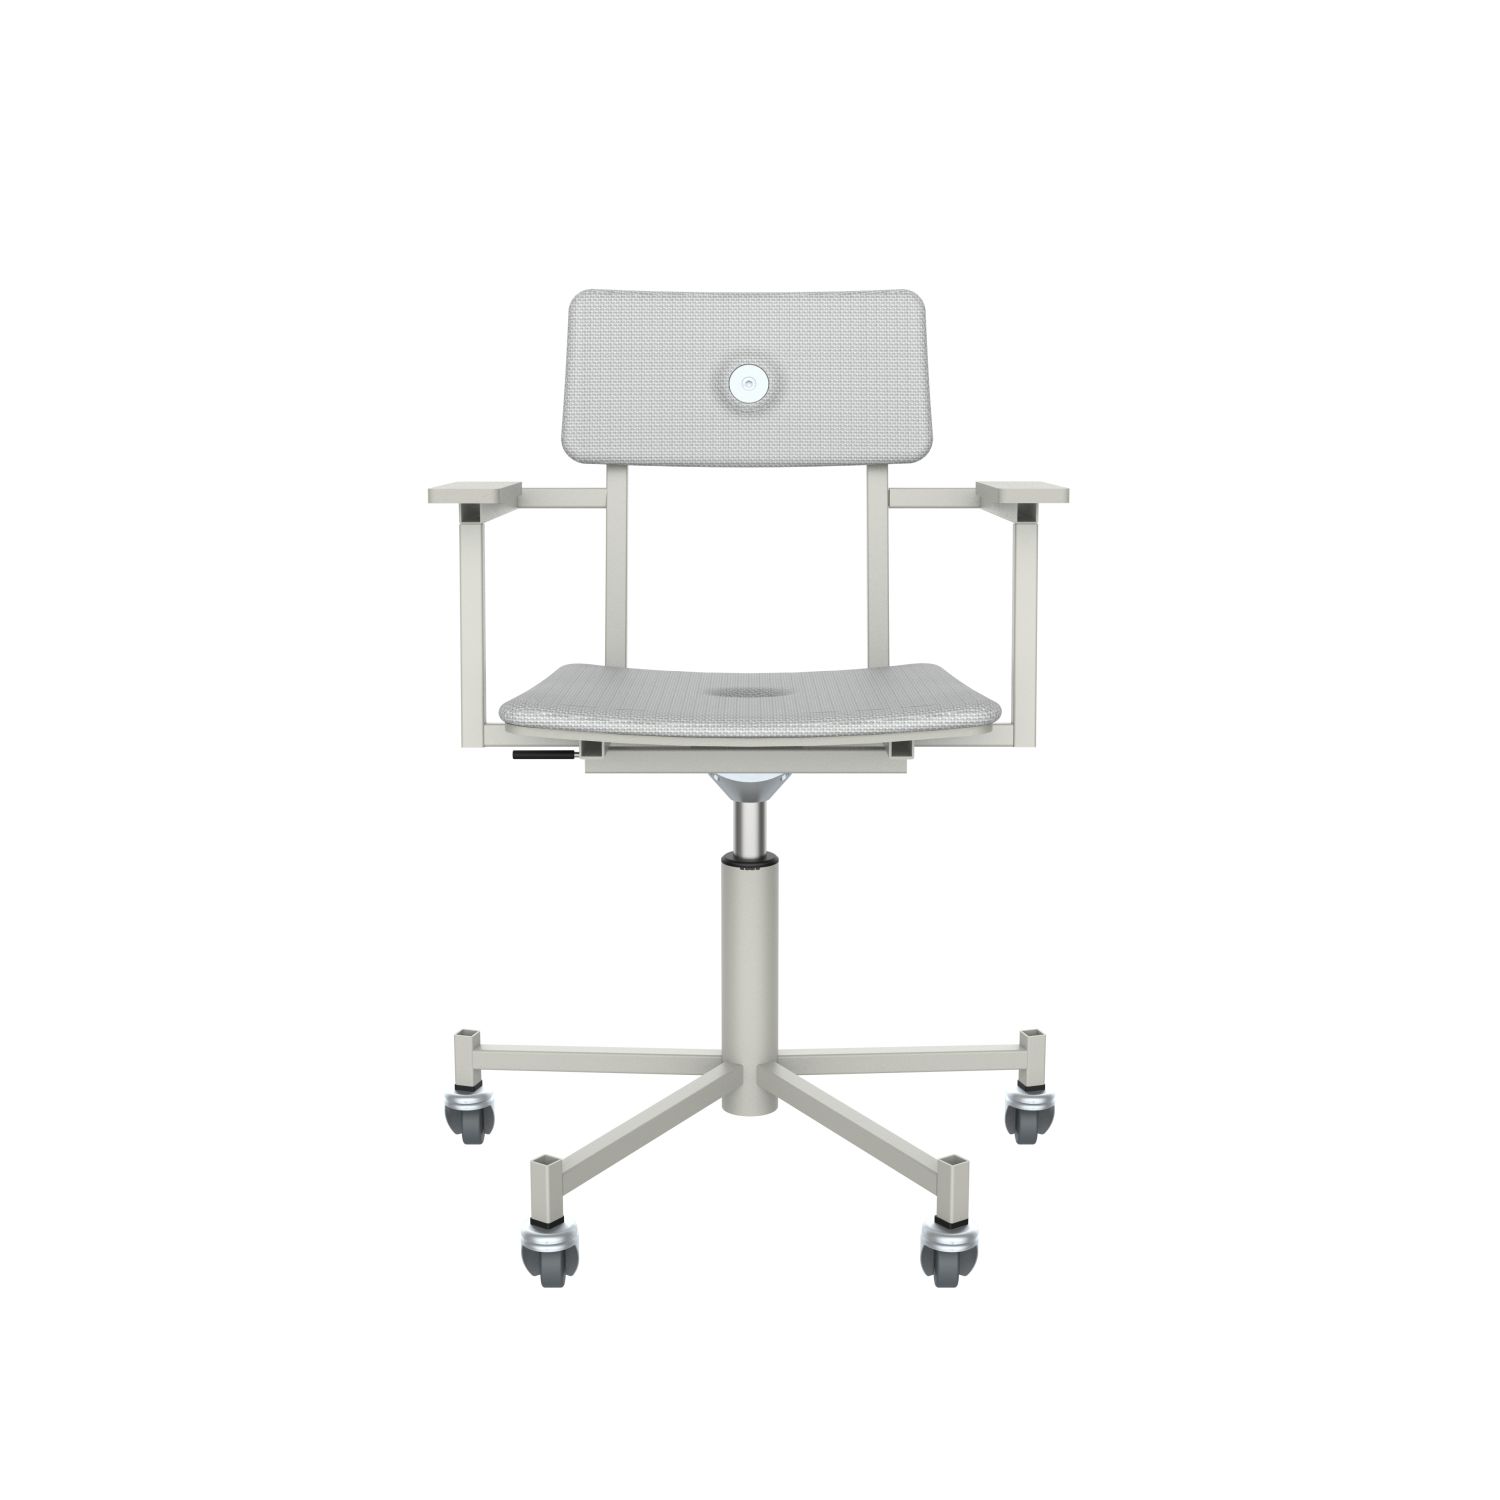 lensvelt piet hein eek mitw upholstered office chair with armrests breeze light grey 171 agata grey ral7038 with wheels